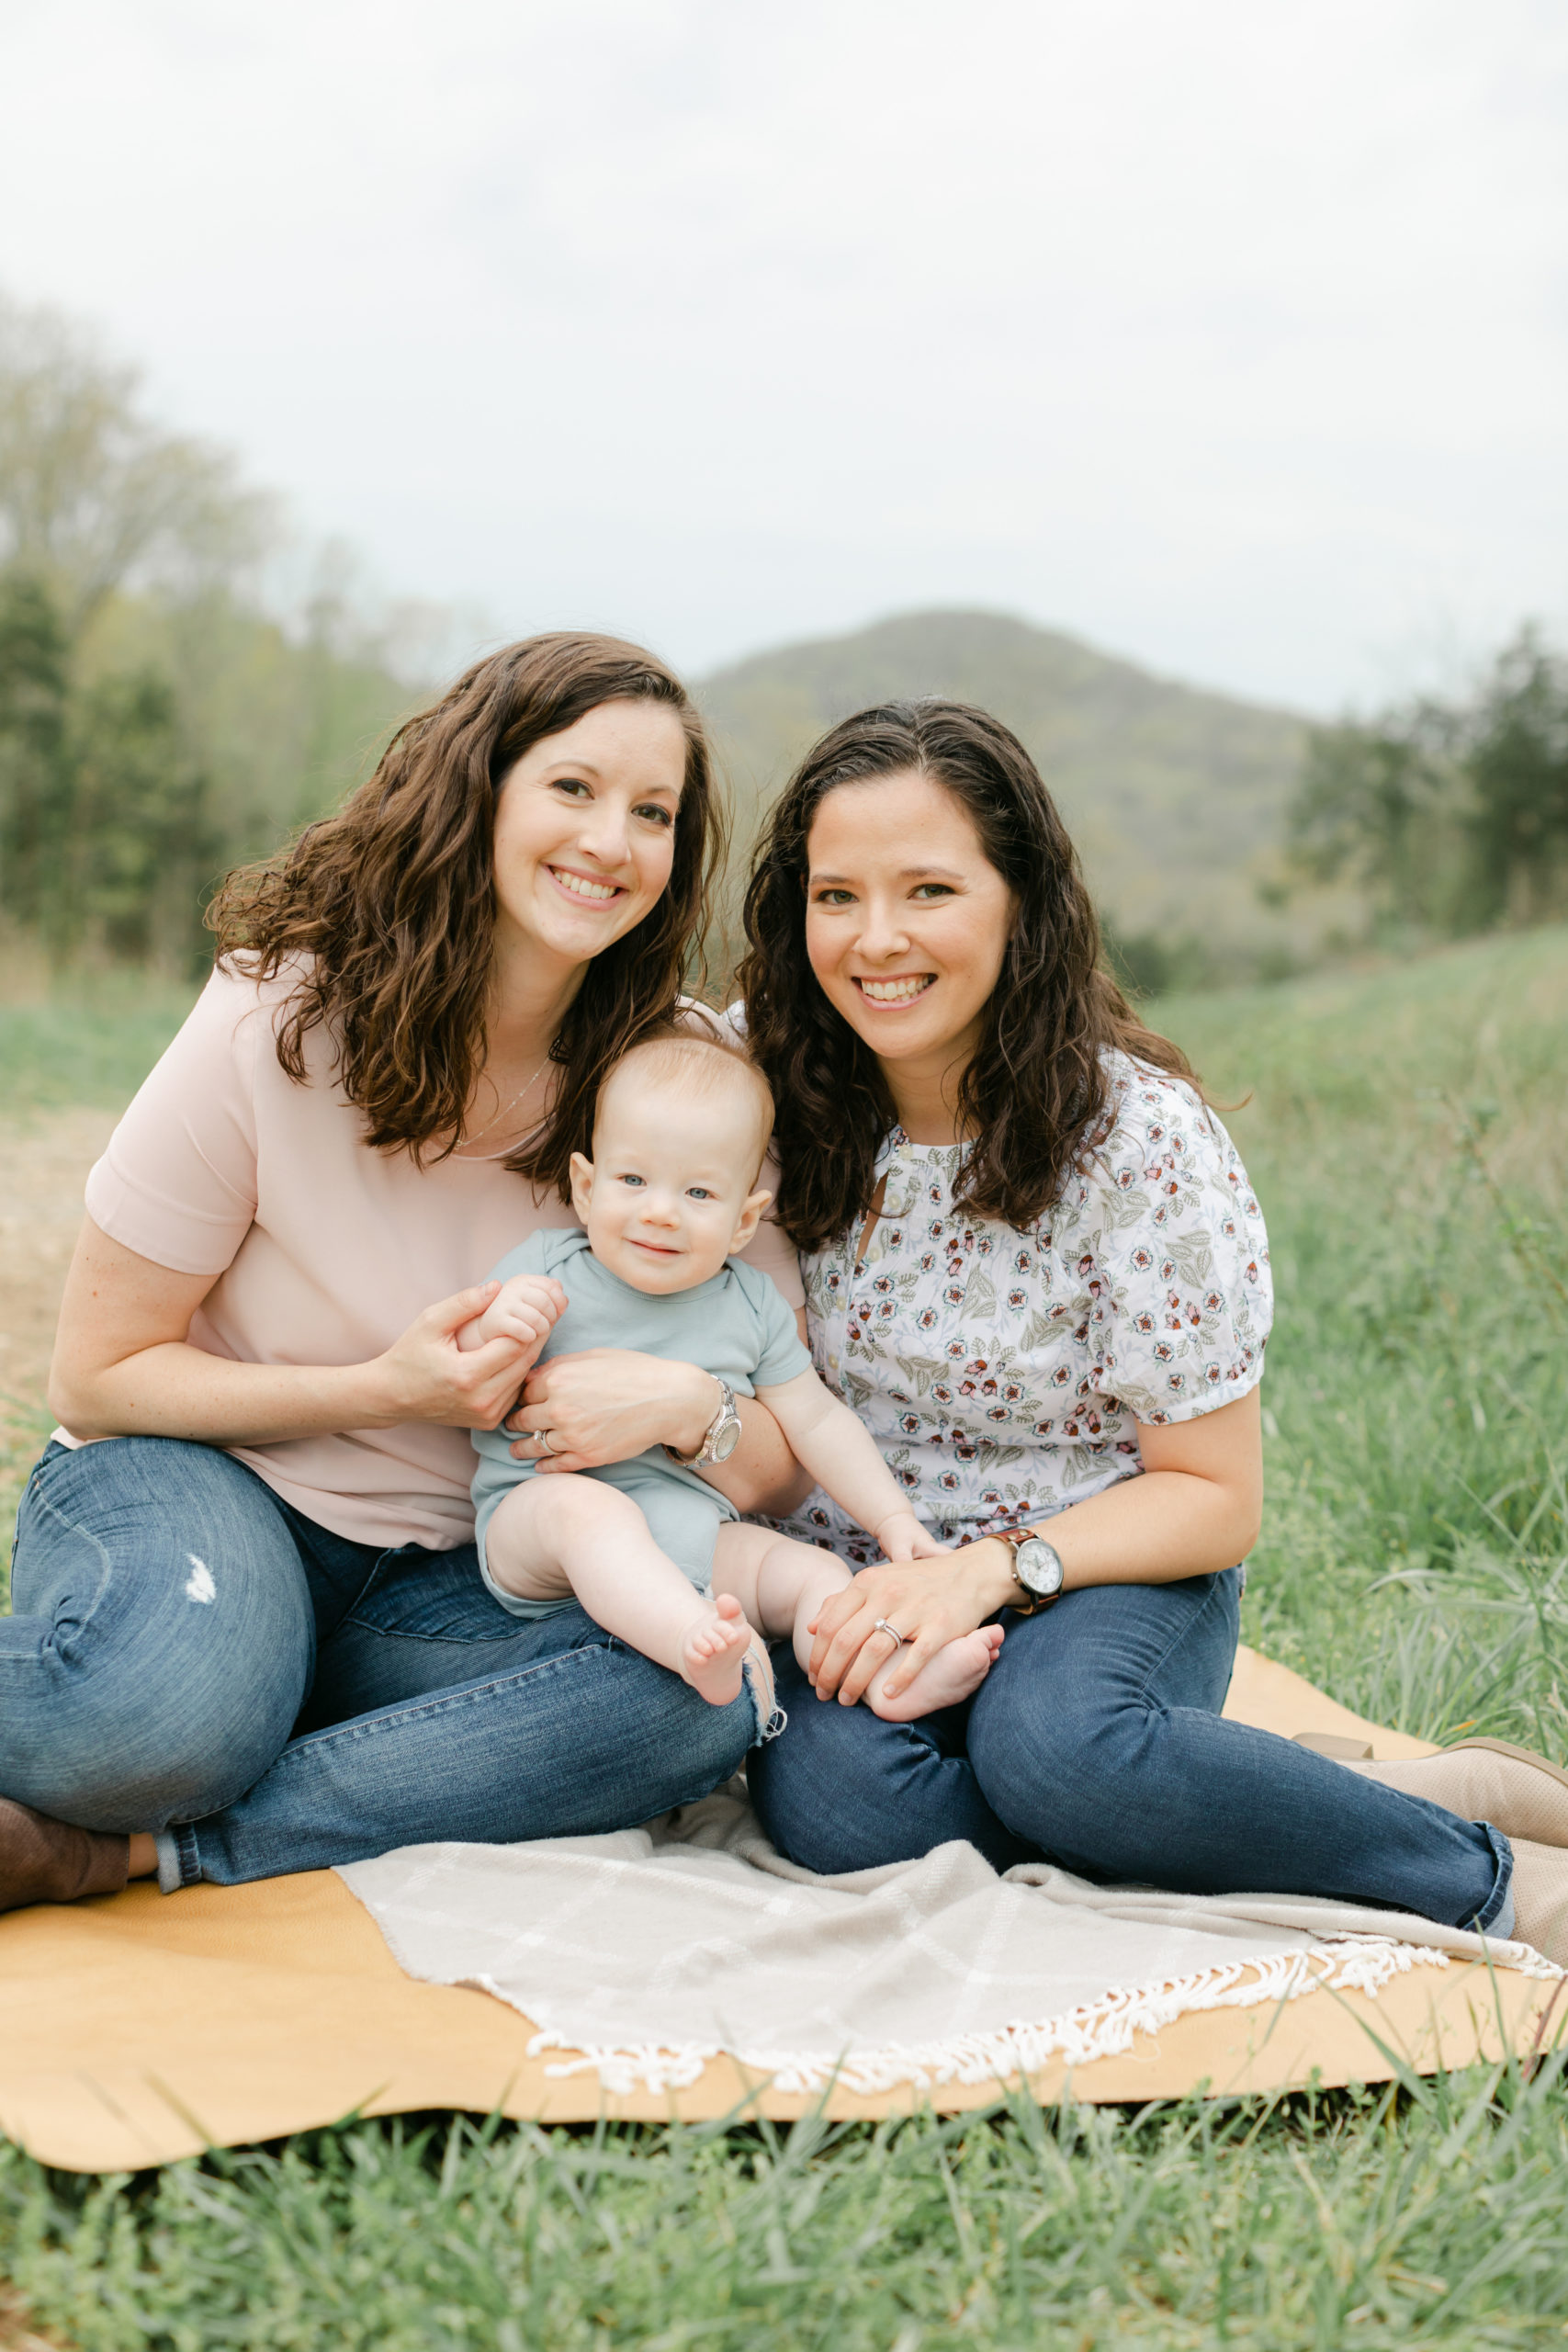 Outdoor photo of two mamas sitting on the grass, holding their 6 month old baby boy and smiling at camera.